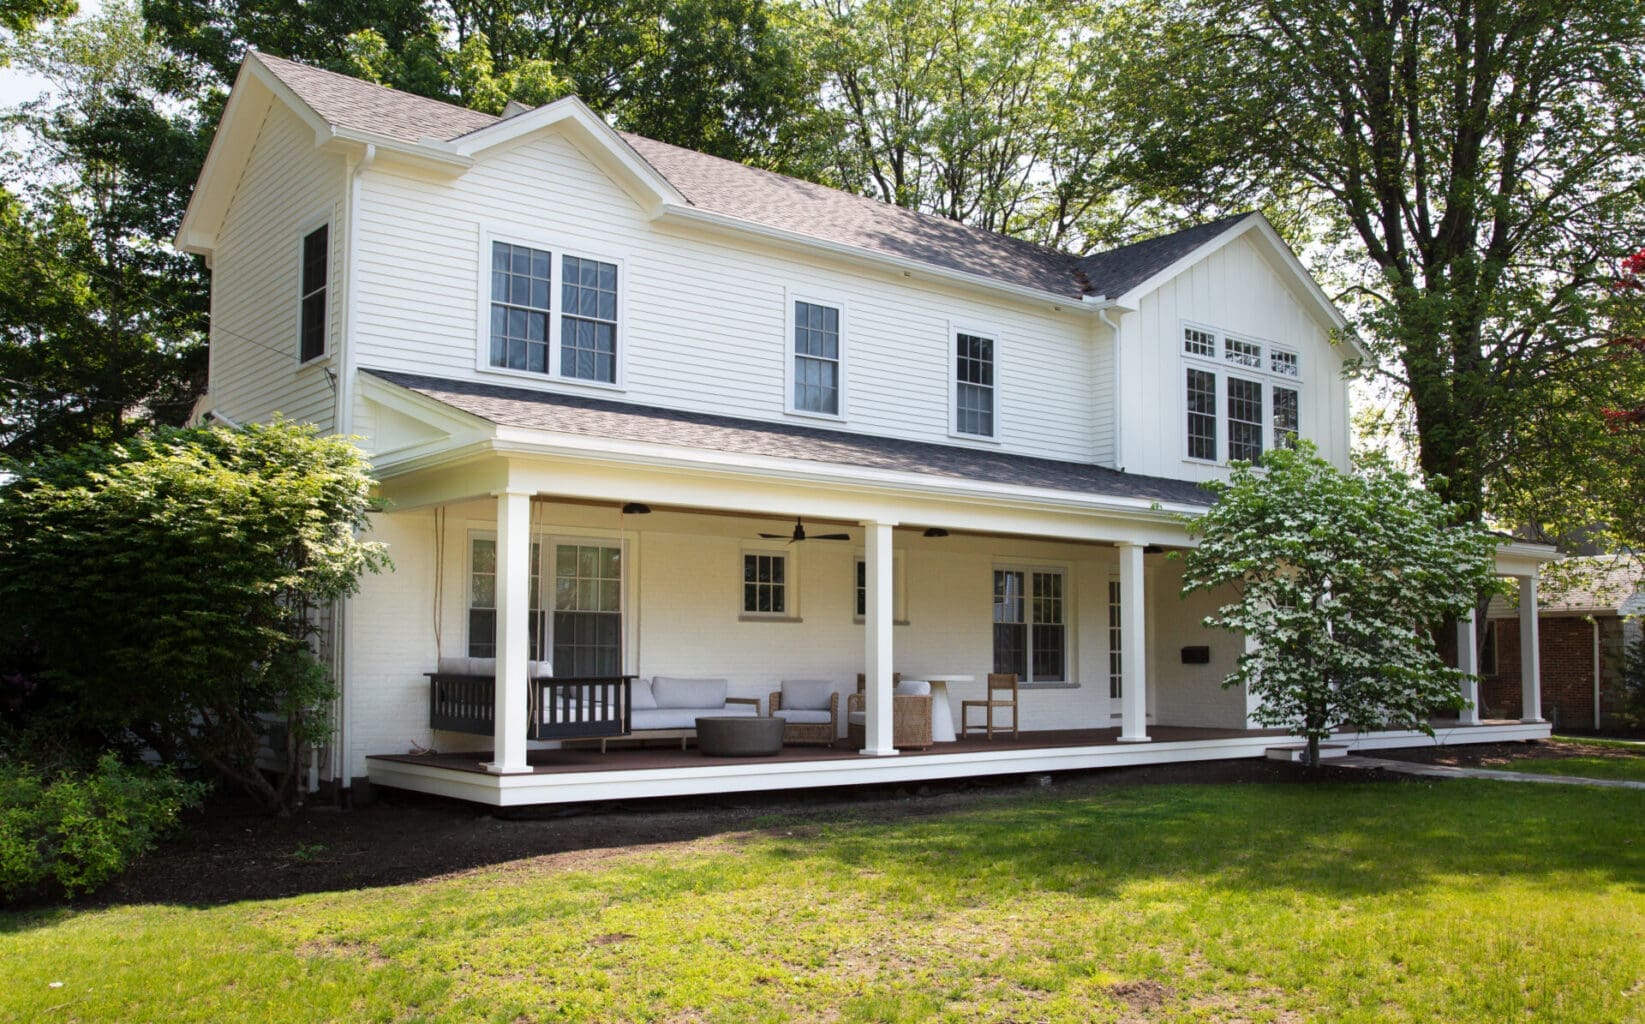 A photo of a white two-level house with a farmers porch with white square pillars, dark brown wooden flooring, and assorted outdoor furniture with grey cushions.